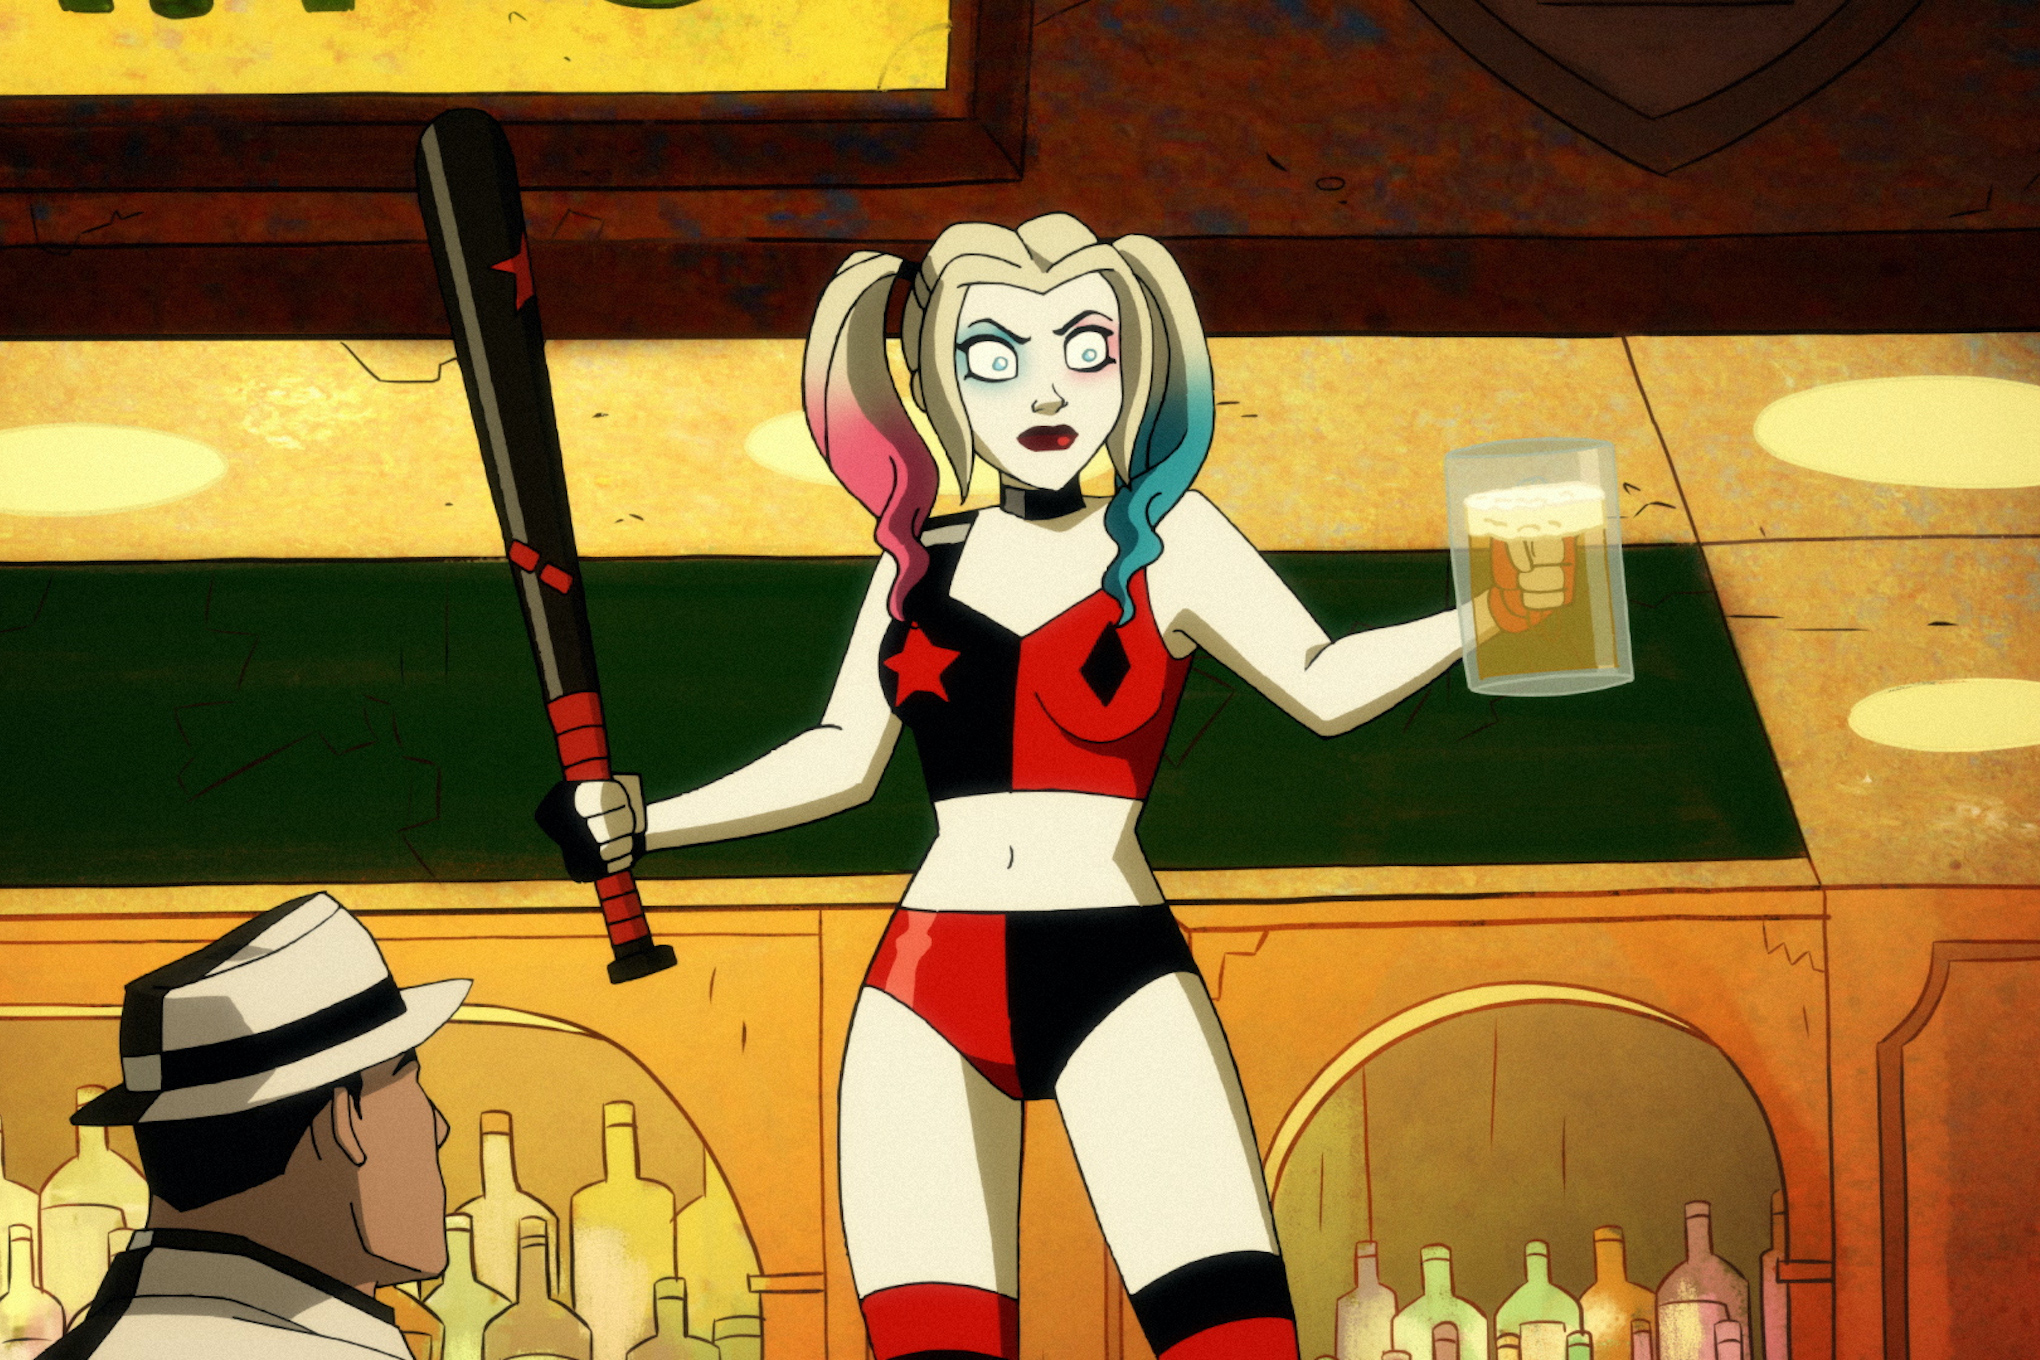 Harley Quinn stands on a bar, bat in one hand, full beer stein in another, in season 2 of Harley Quinn.